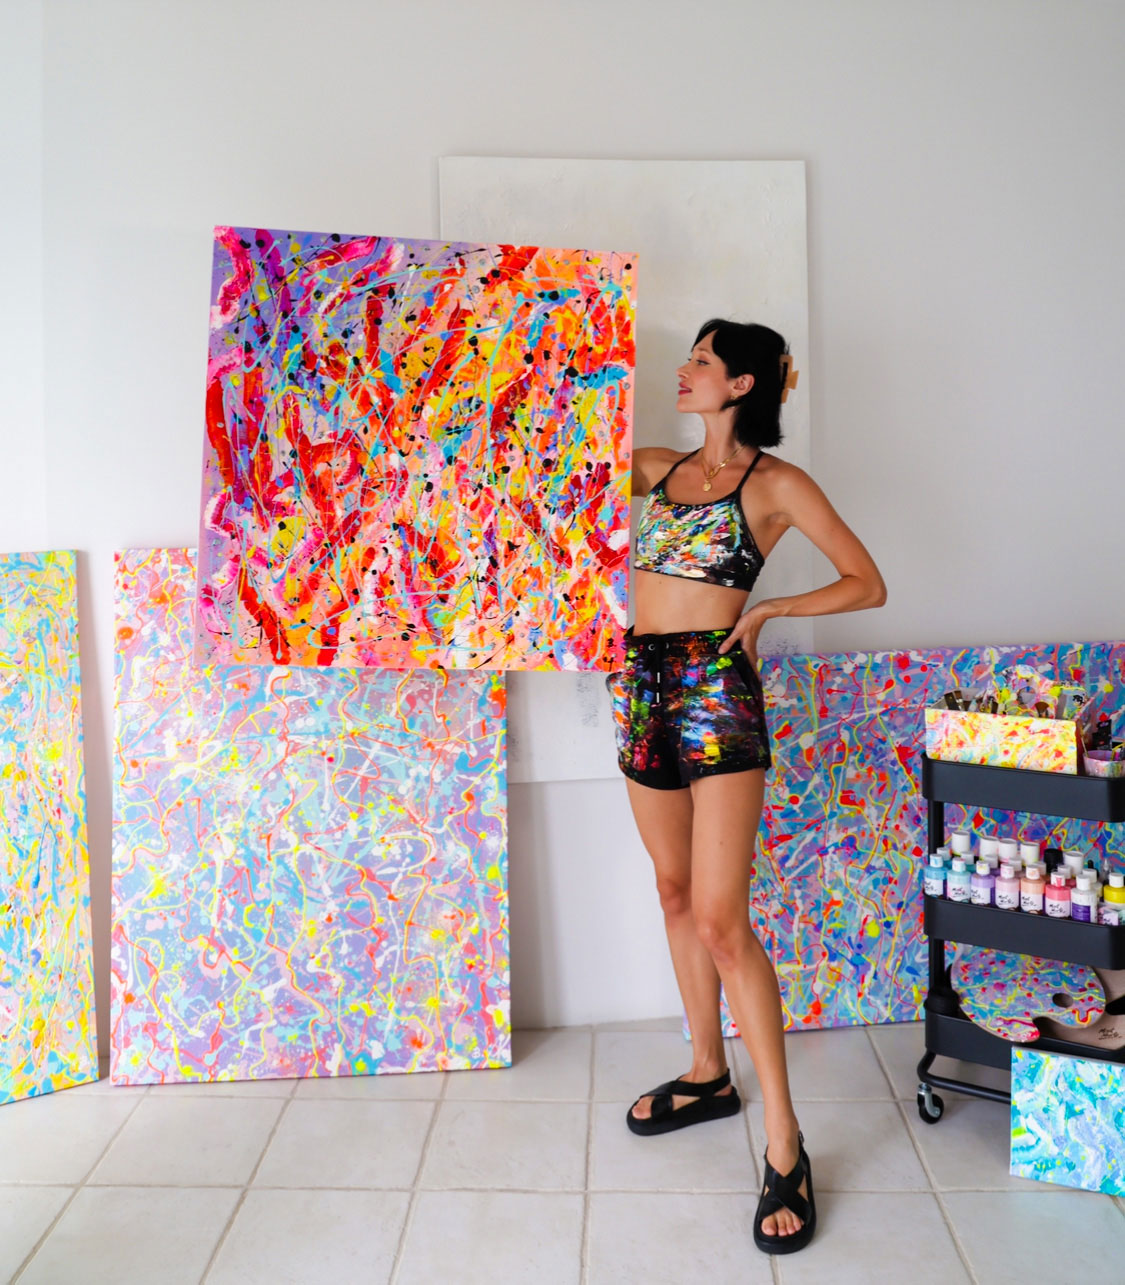 Abstract Artist, Bridget Bradley stands holding her original painting 'Alive' and surrounded by her other abstract artworks and art materials